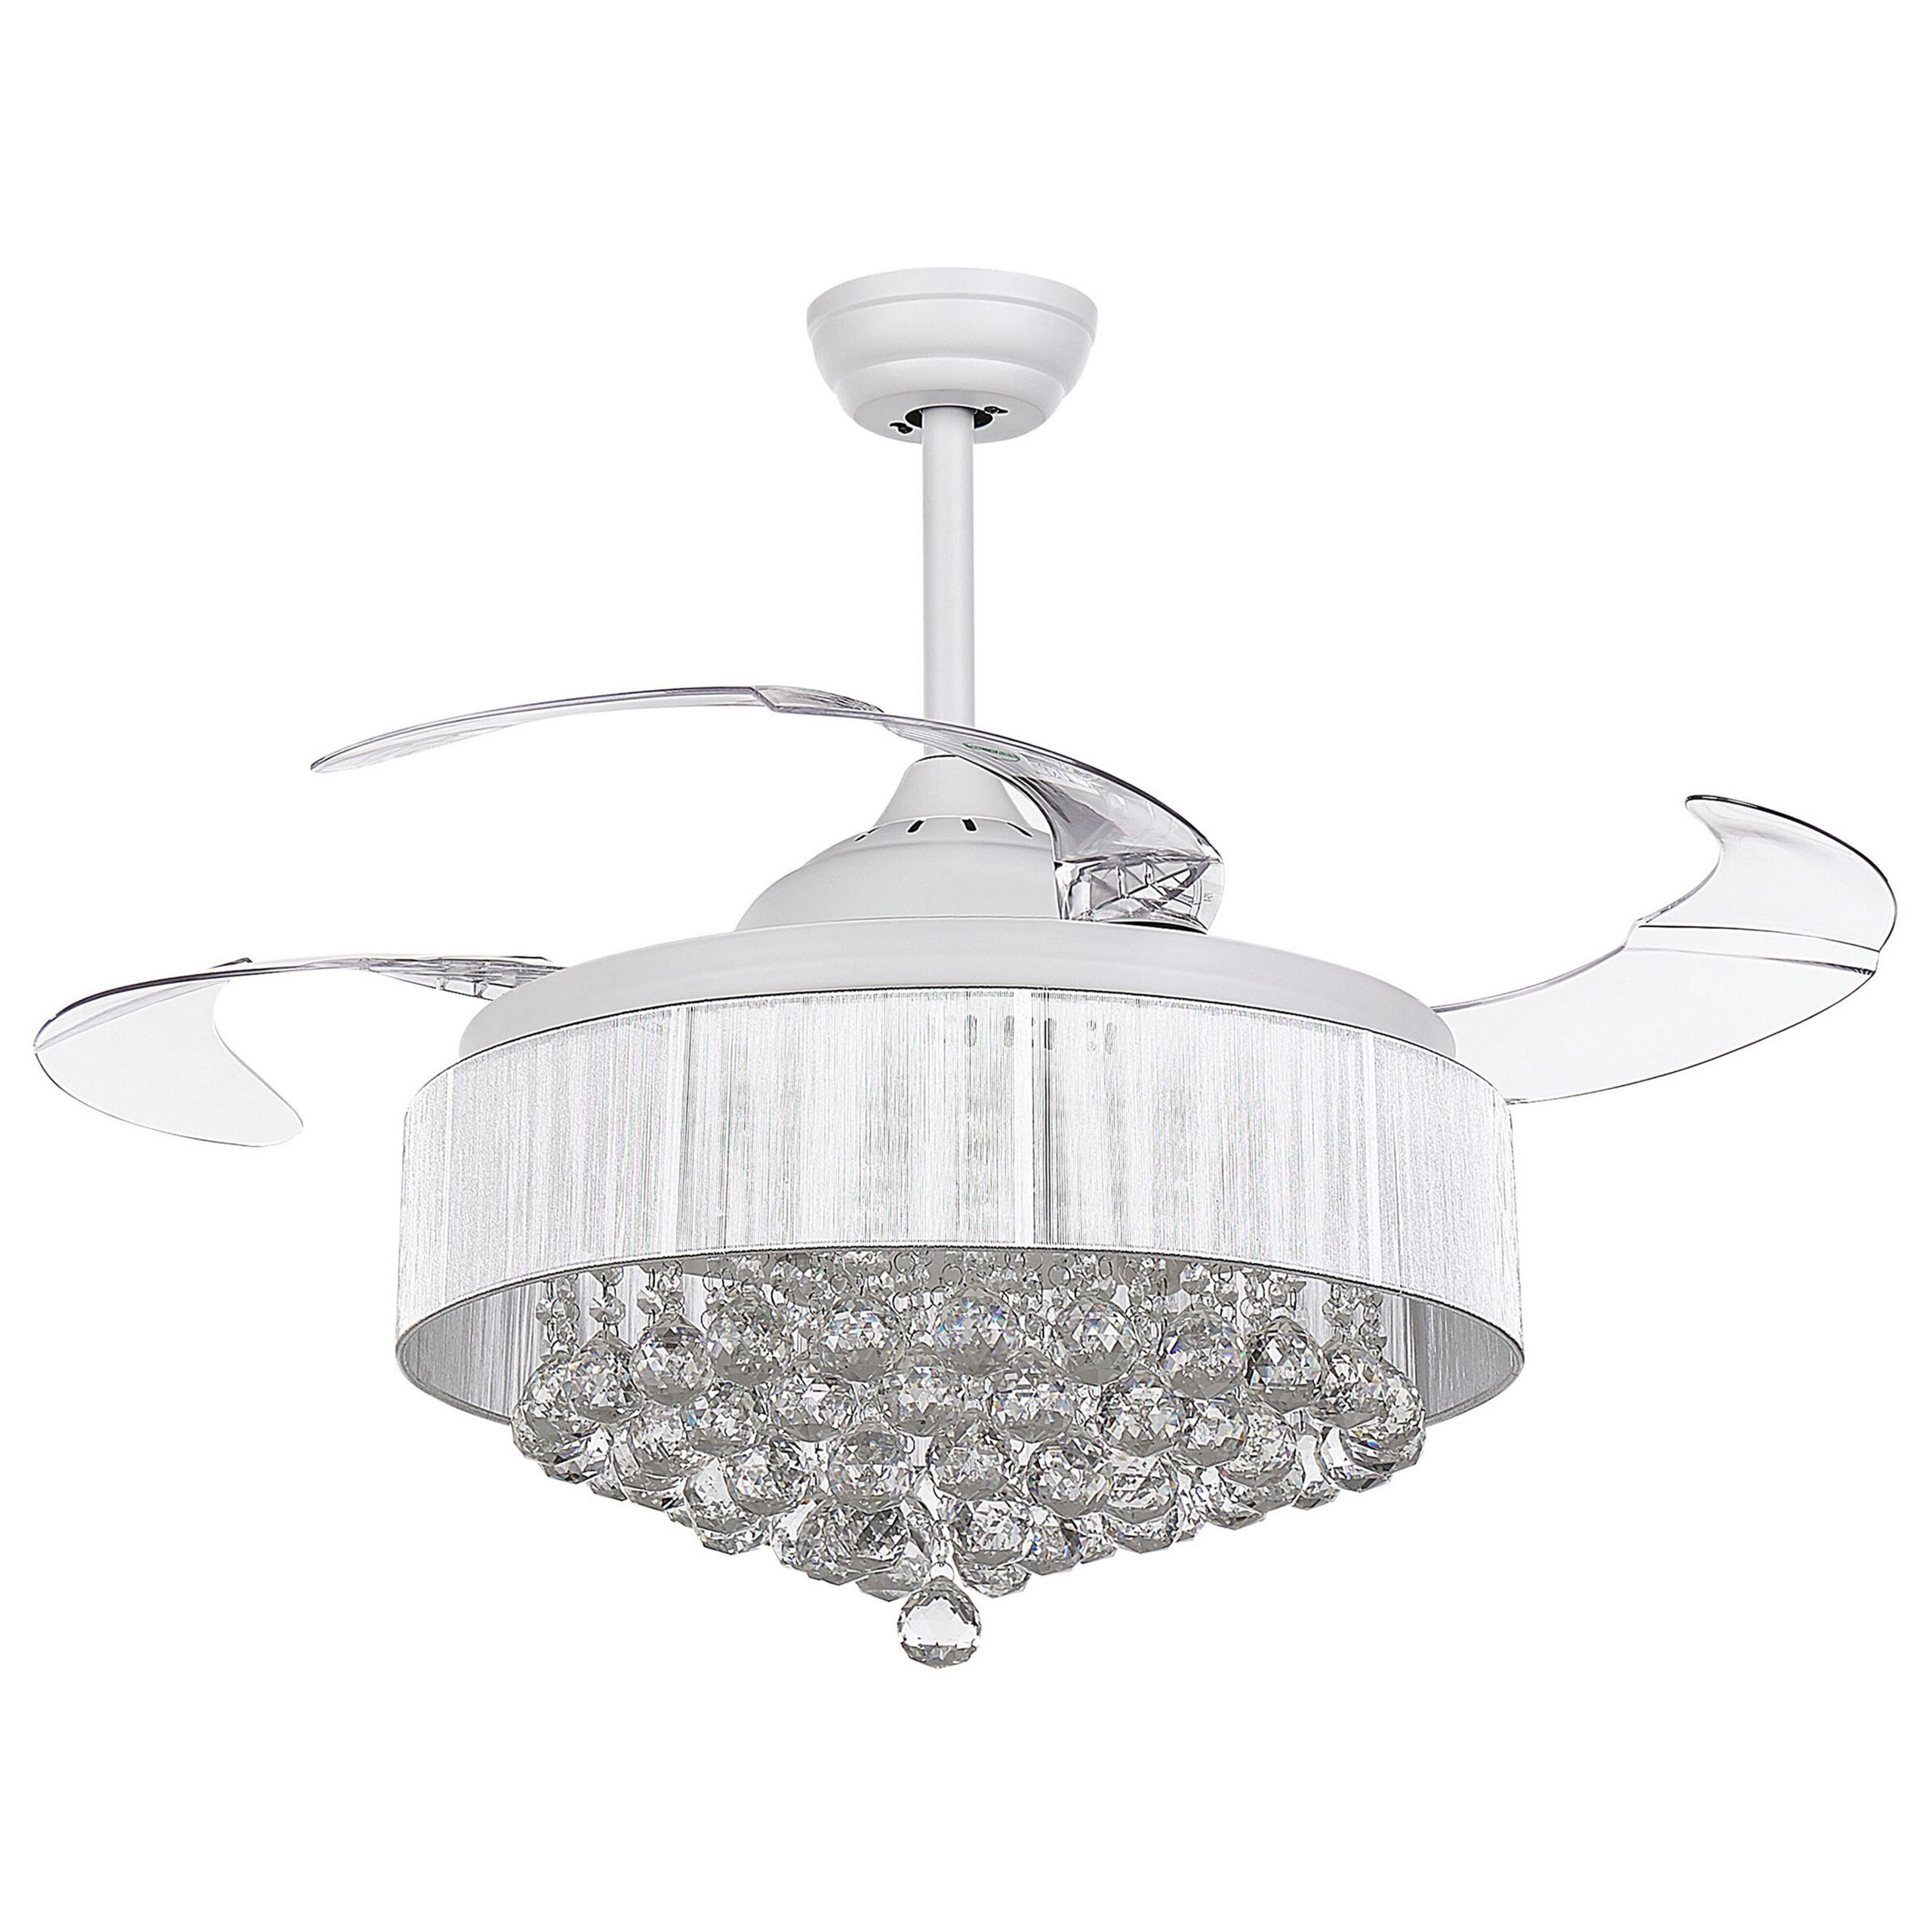 Beliani Ceiling Fan with Light White Metal Acrylic Crystals Foldable Blades Glam Shade with Remote Control 3 Speeds Switch Timer Light Adjustment